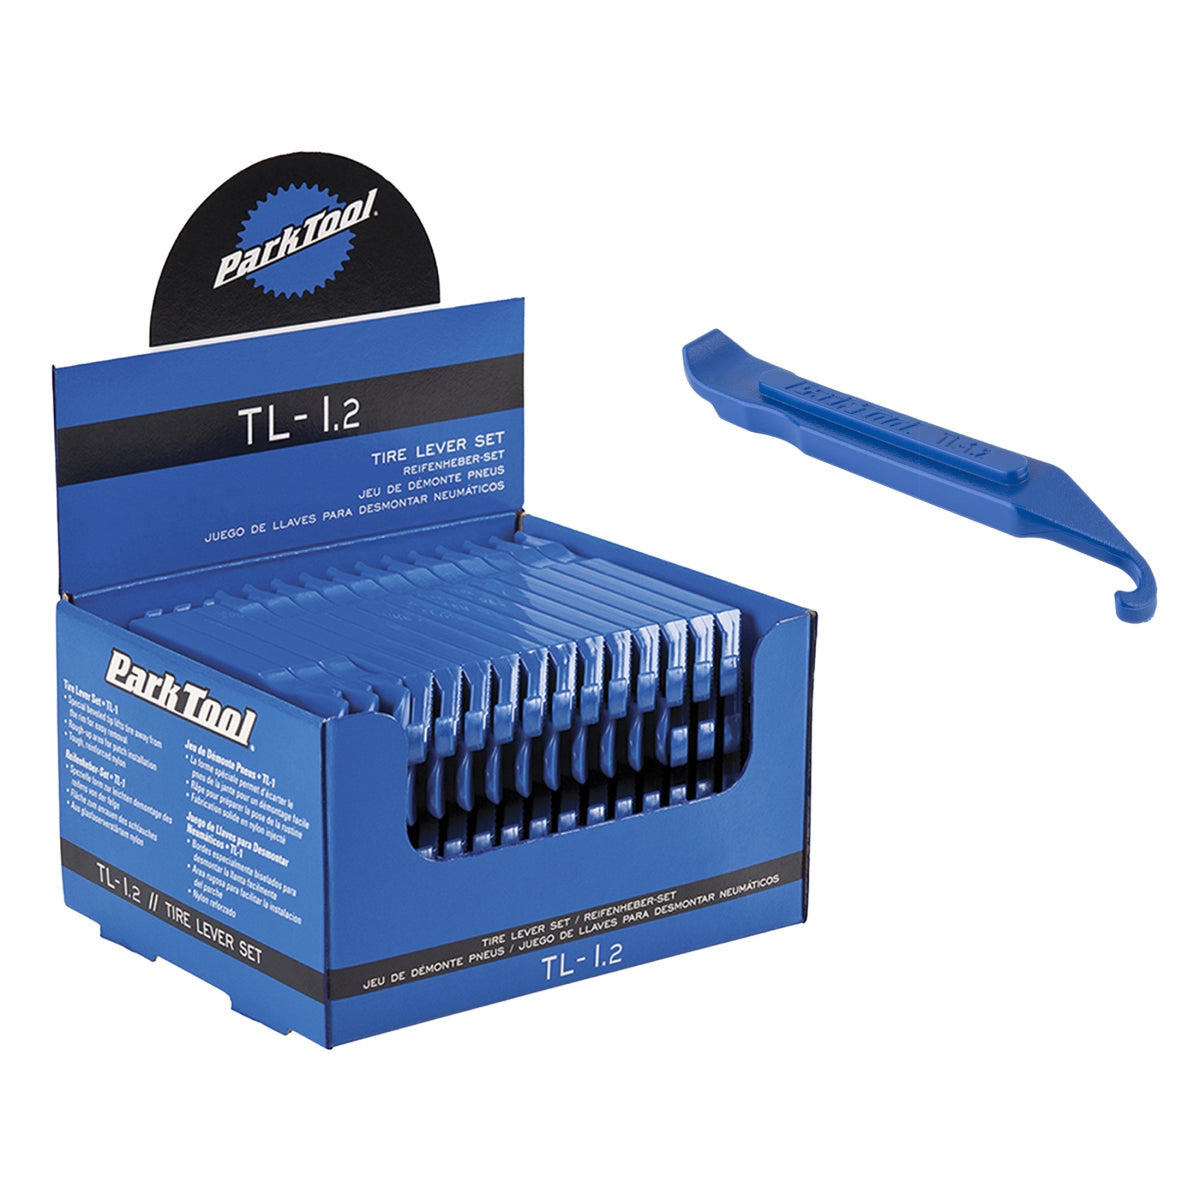 Park ToolÂ #TL-1.2 Tire Levers, Box of 25 Sets